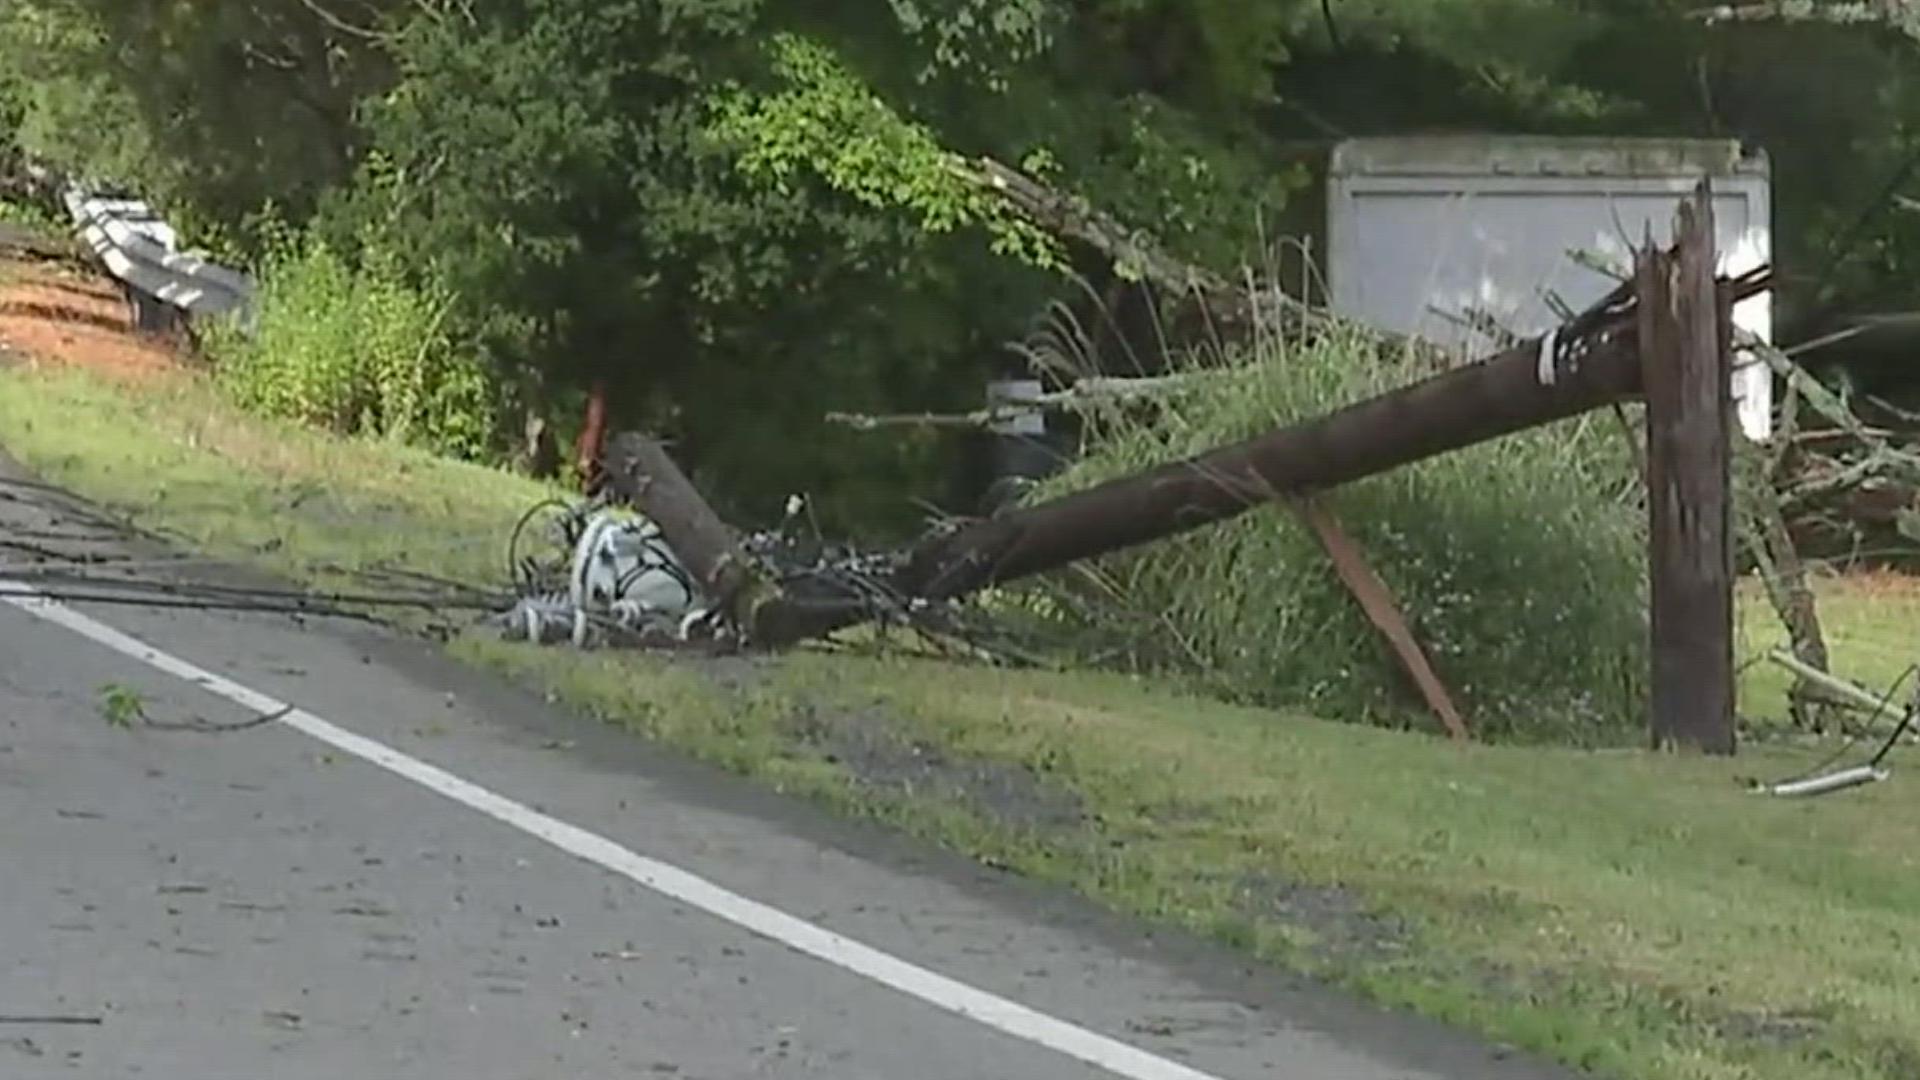 Dauphin County was one of the hardest-hit areas in our region from severe storms Wednesday.